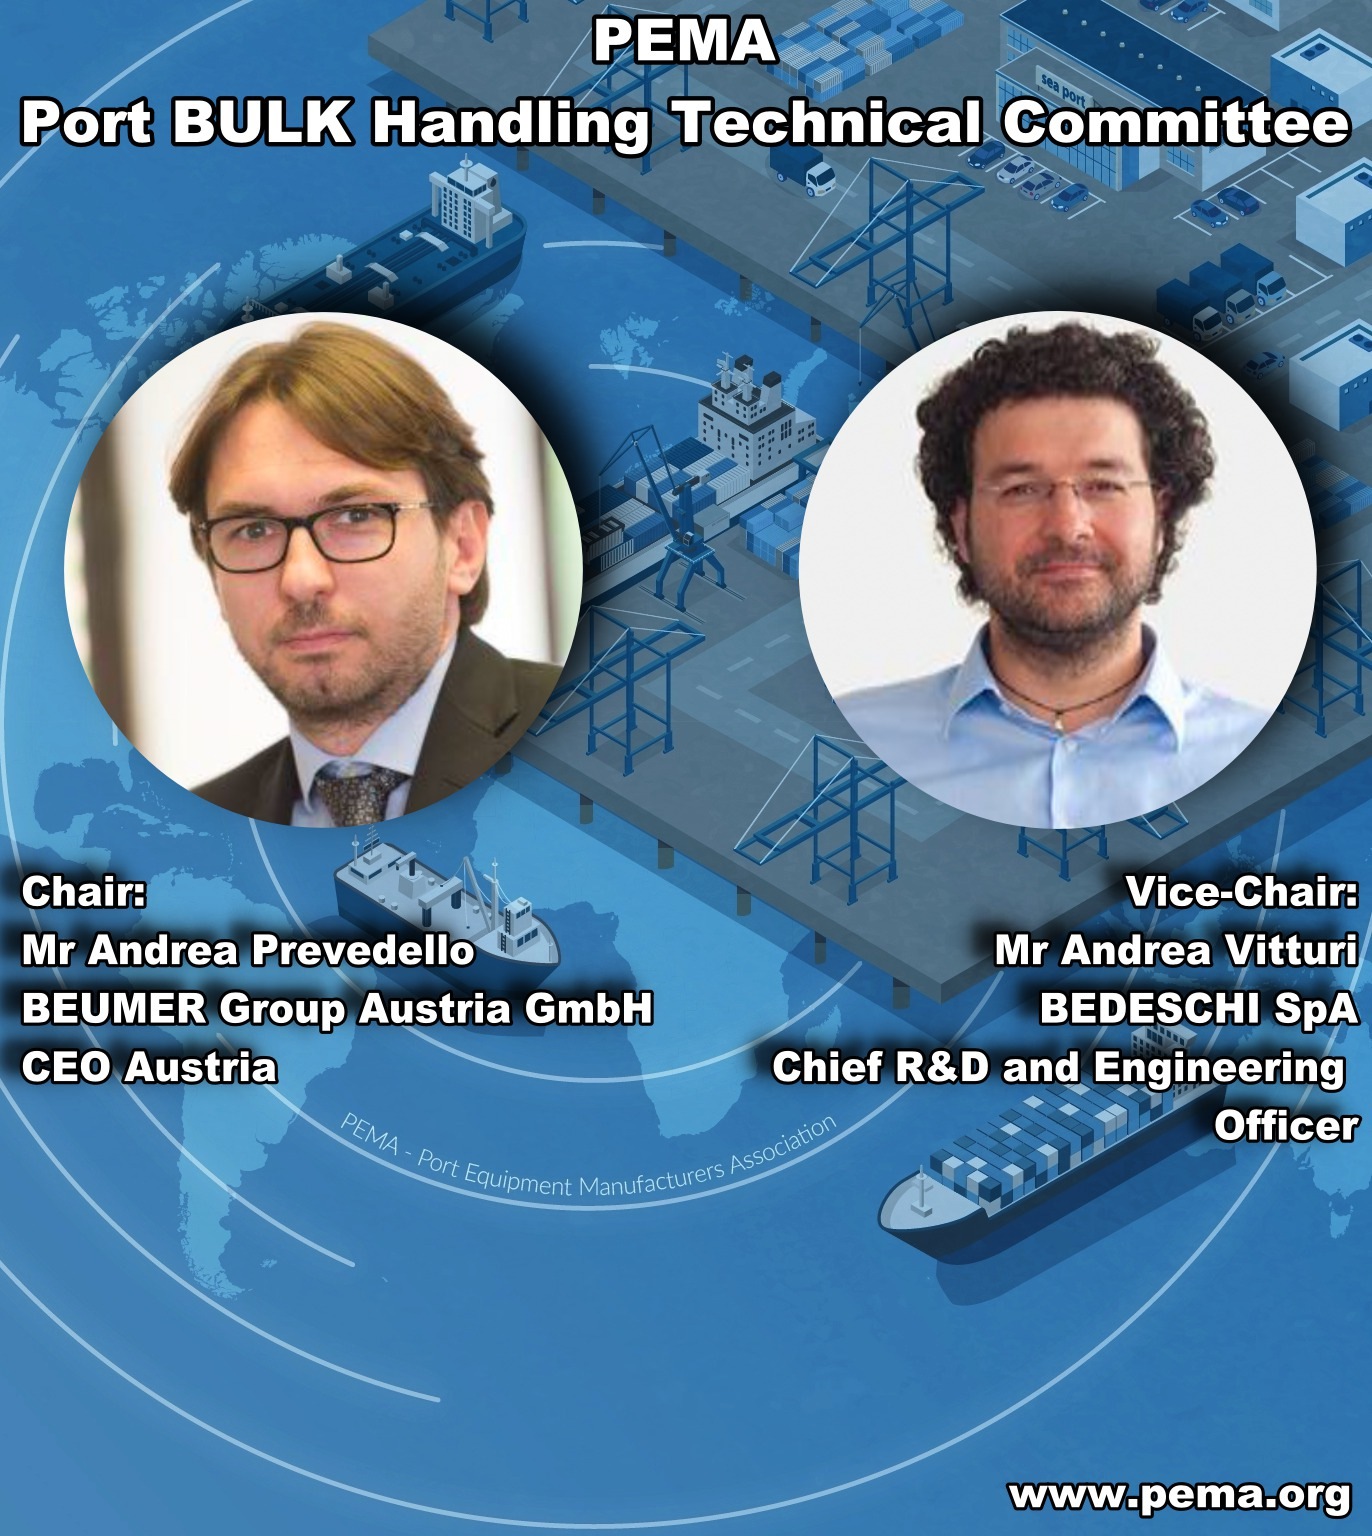 PEMA launches new Technical Committee focusing on port BULK handling